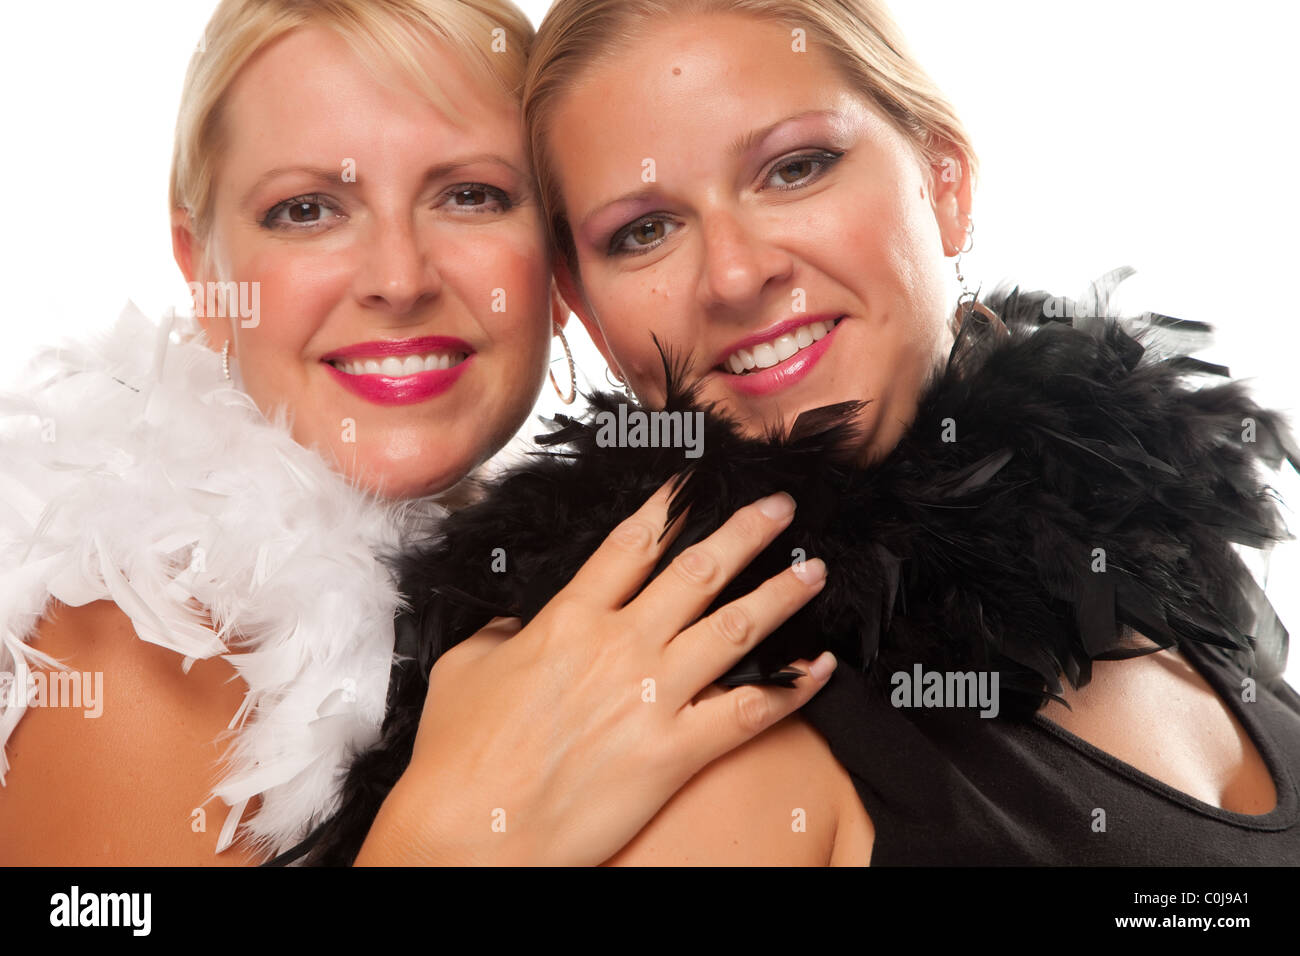 Portrait of Two Blonde Haired Smiling Girls with Feather Boas Isolated on a White Background. Stock Photo